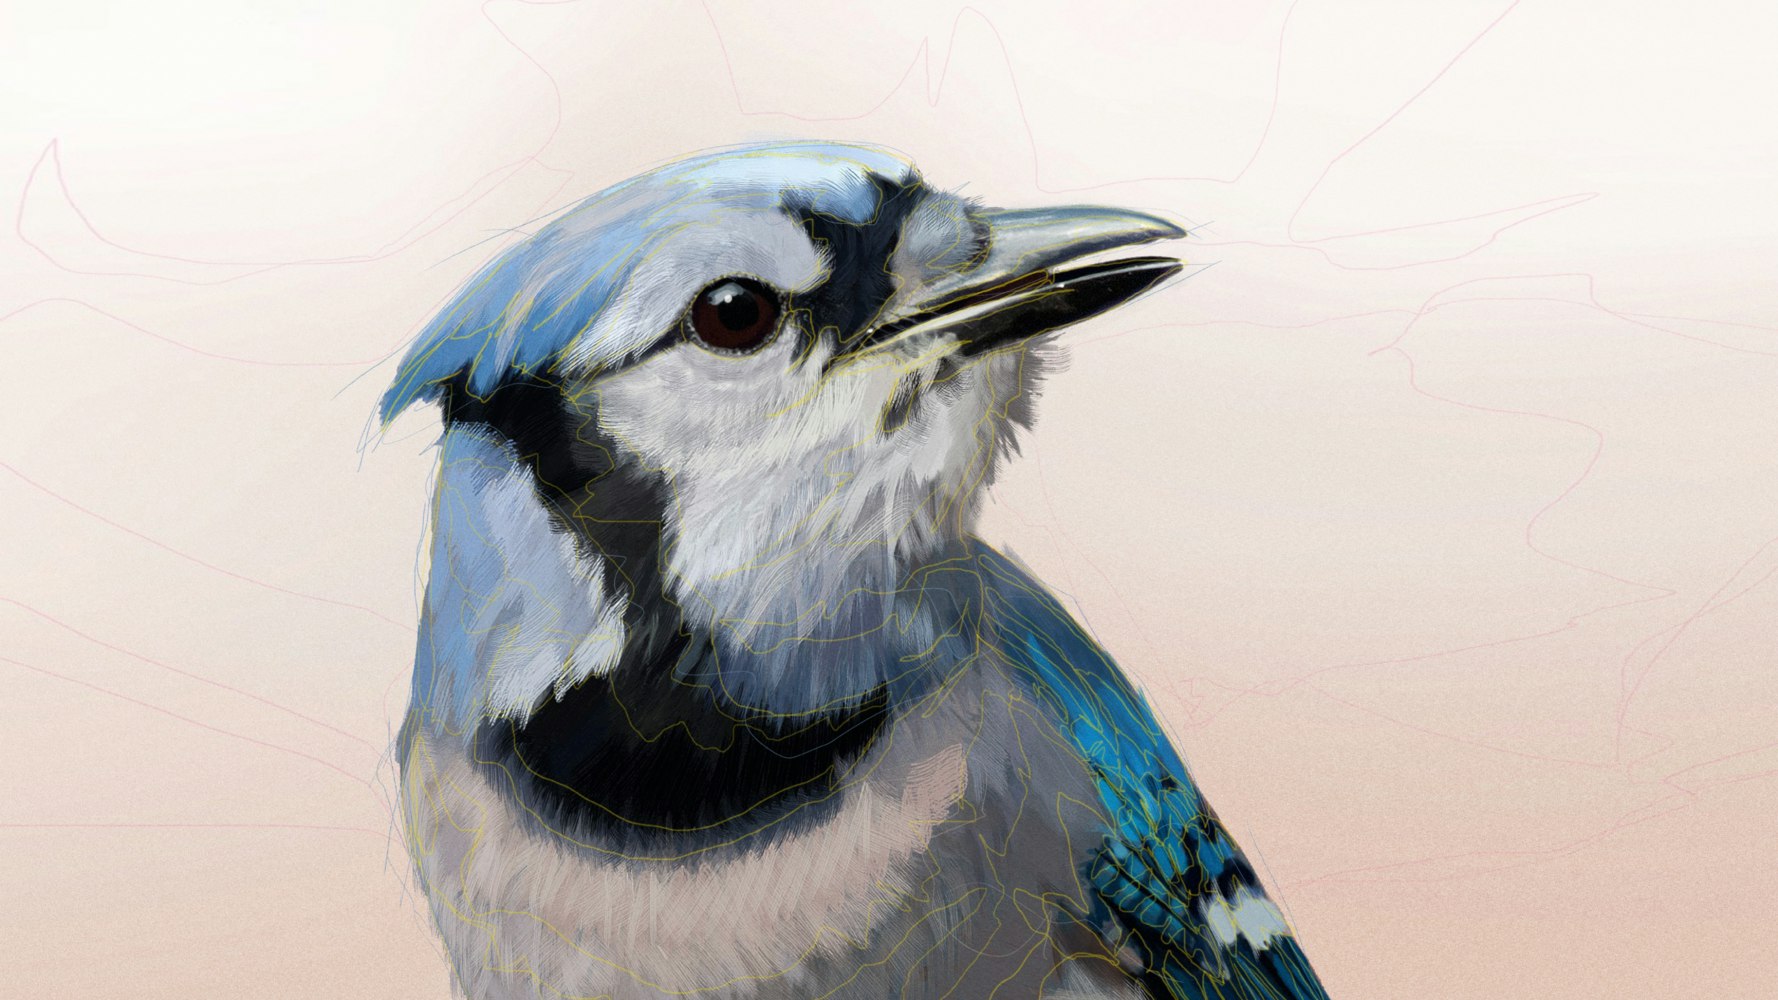 Free Art - Bird with black, white, and blue feathers